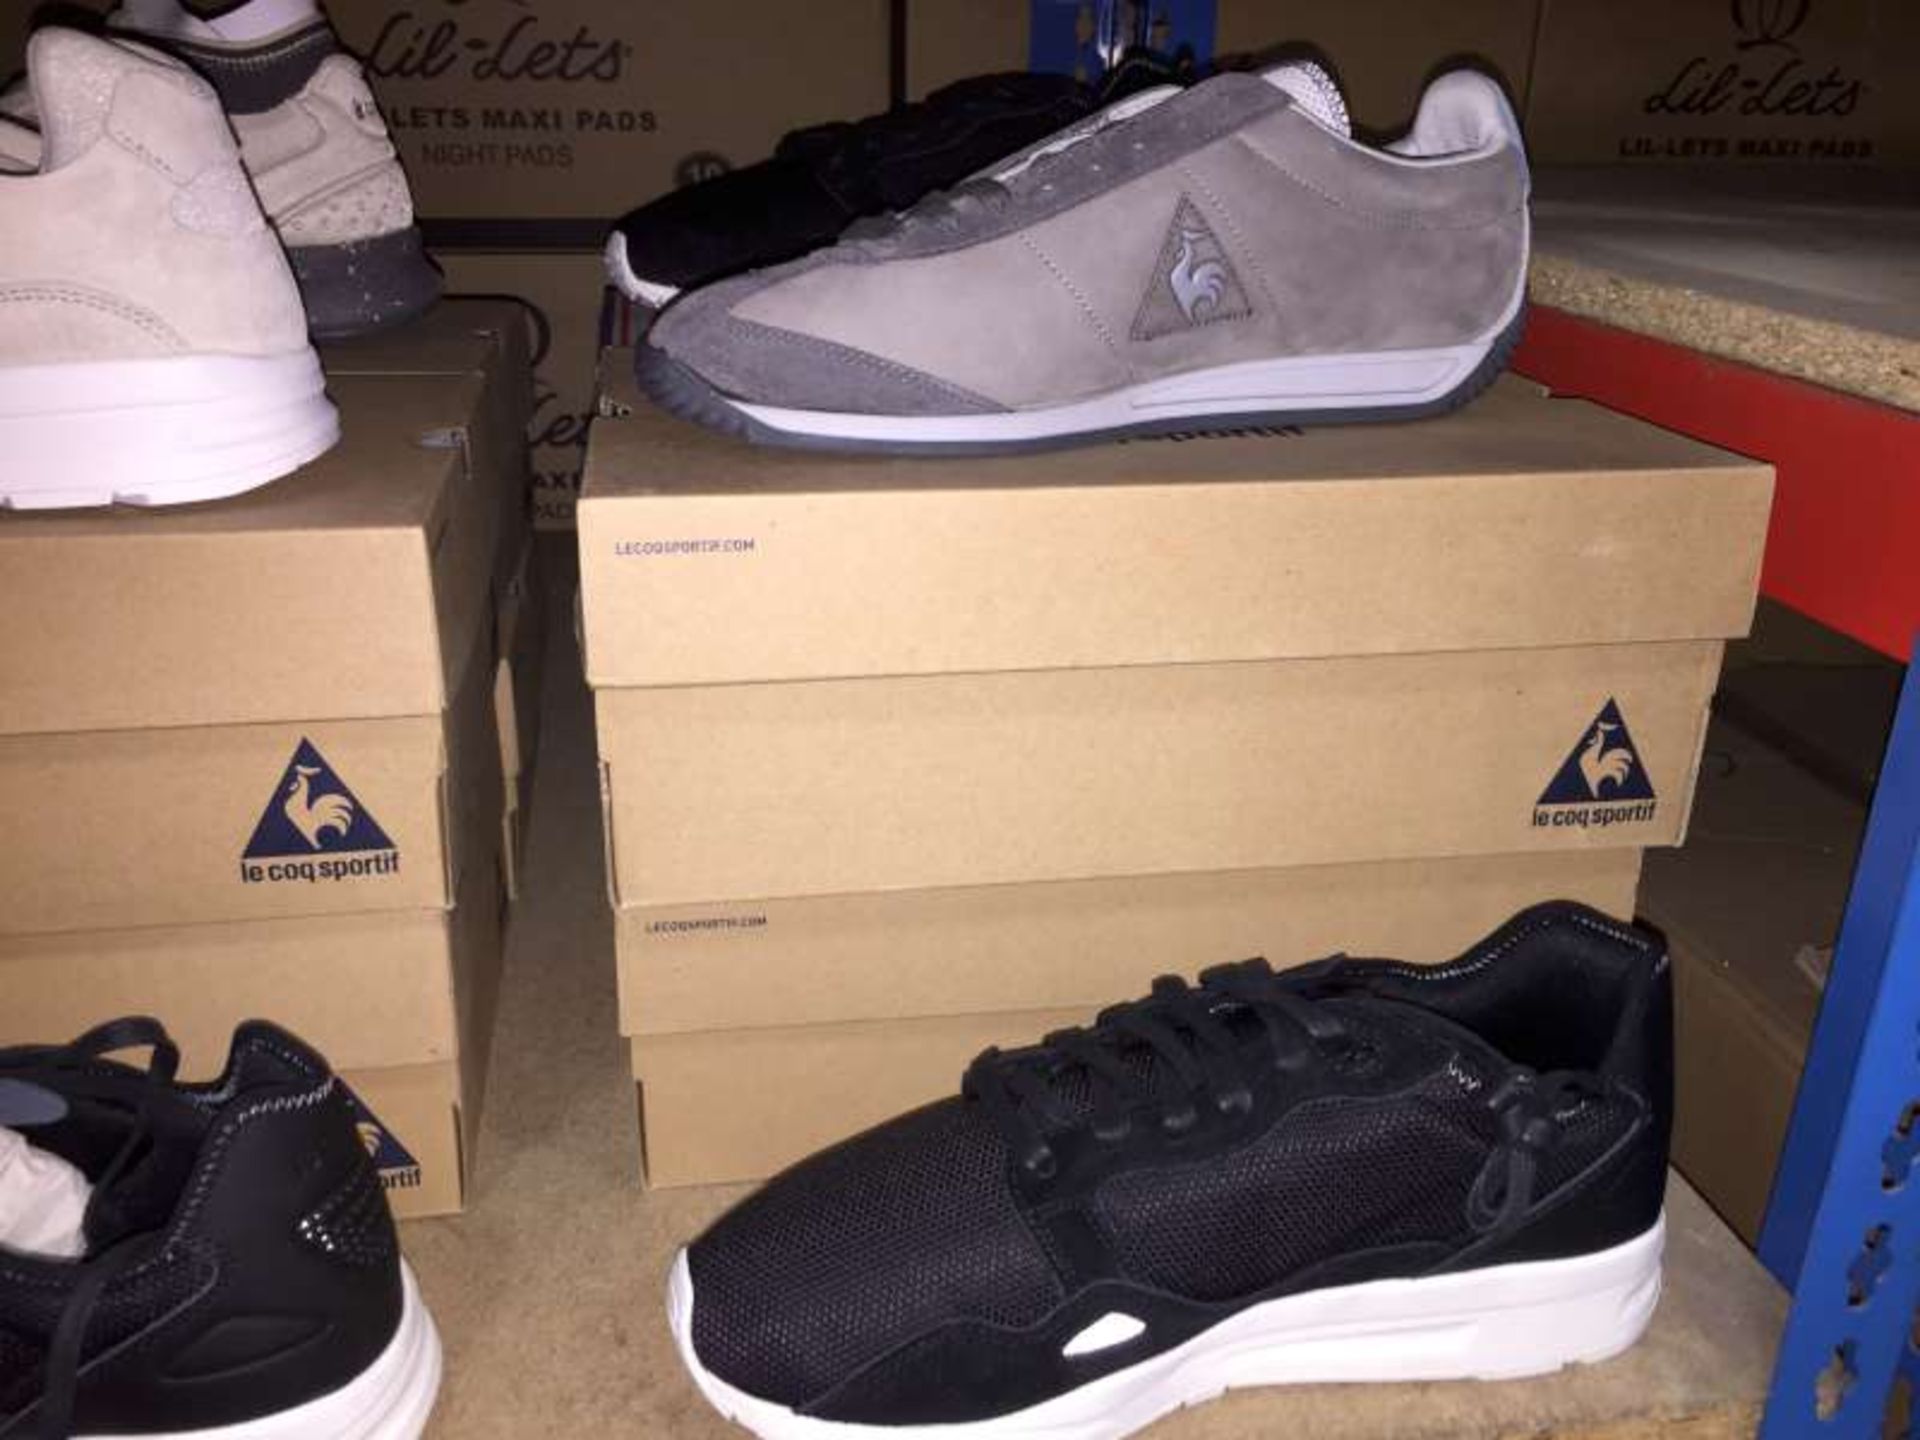 4 X BRAND NEW BOXED LE COQ SPORTIF TRAINERS IN SIZES 10.5 / 9